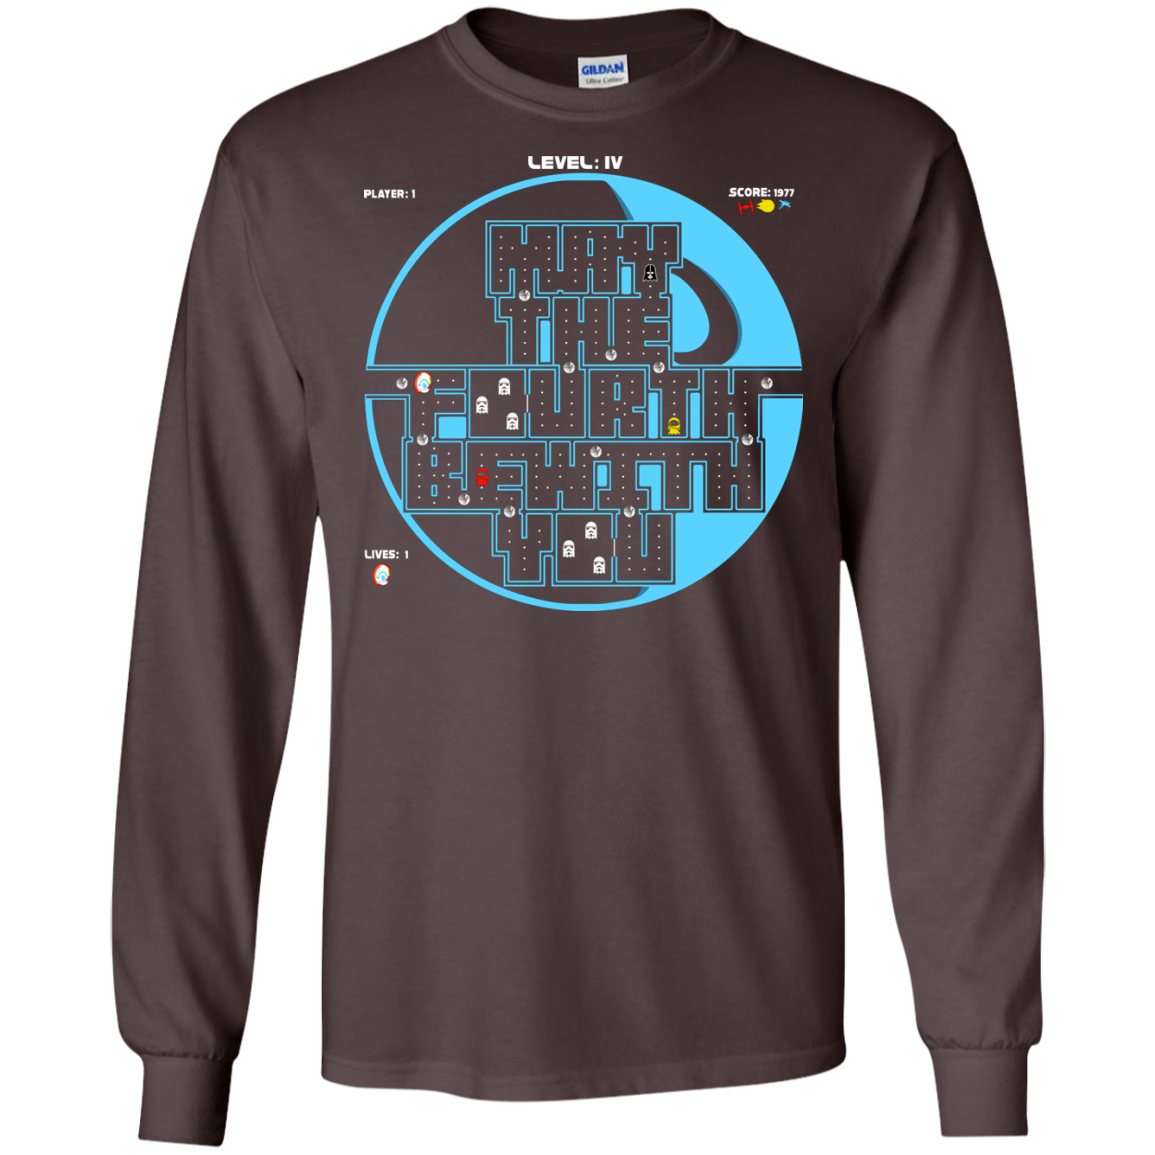 Pacman May The Fourth Men's Long Sleeve T-Shirt